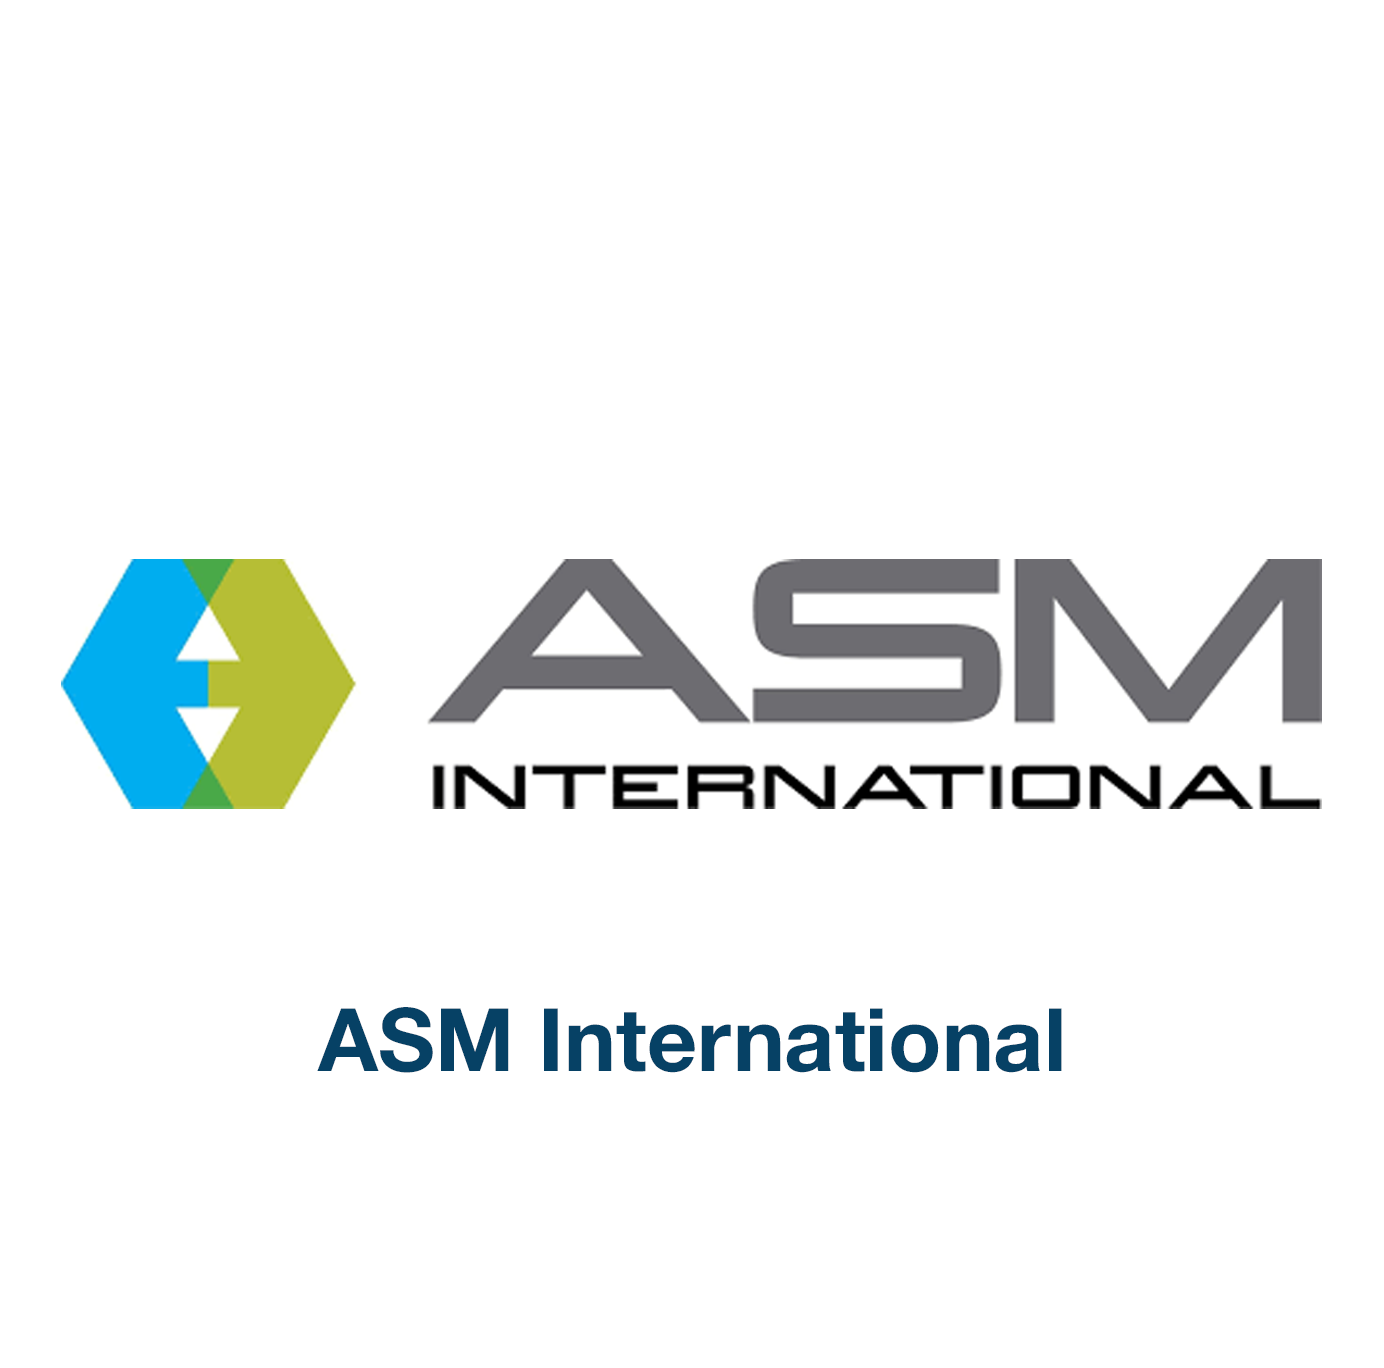 ASM (American Society for Metals)